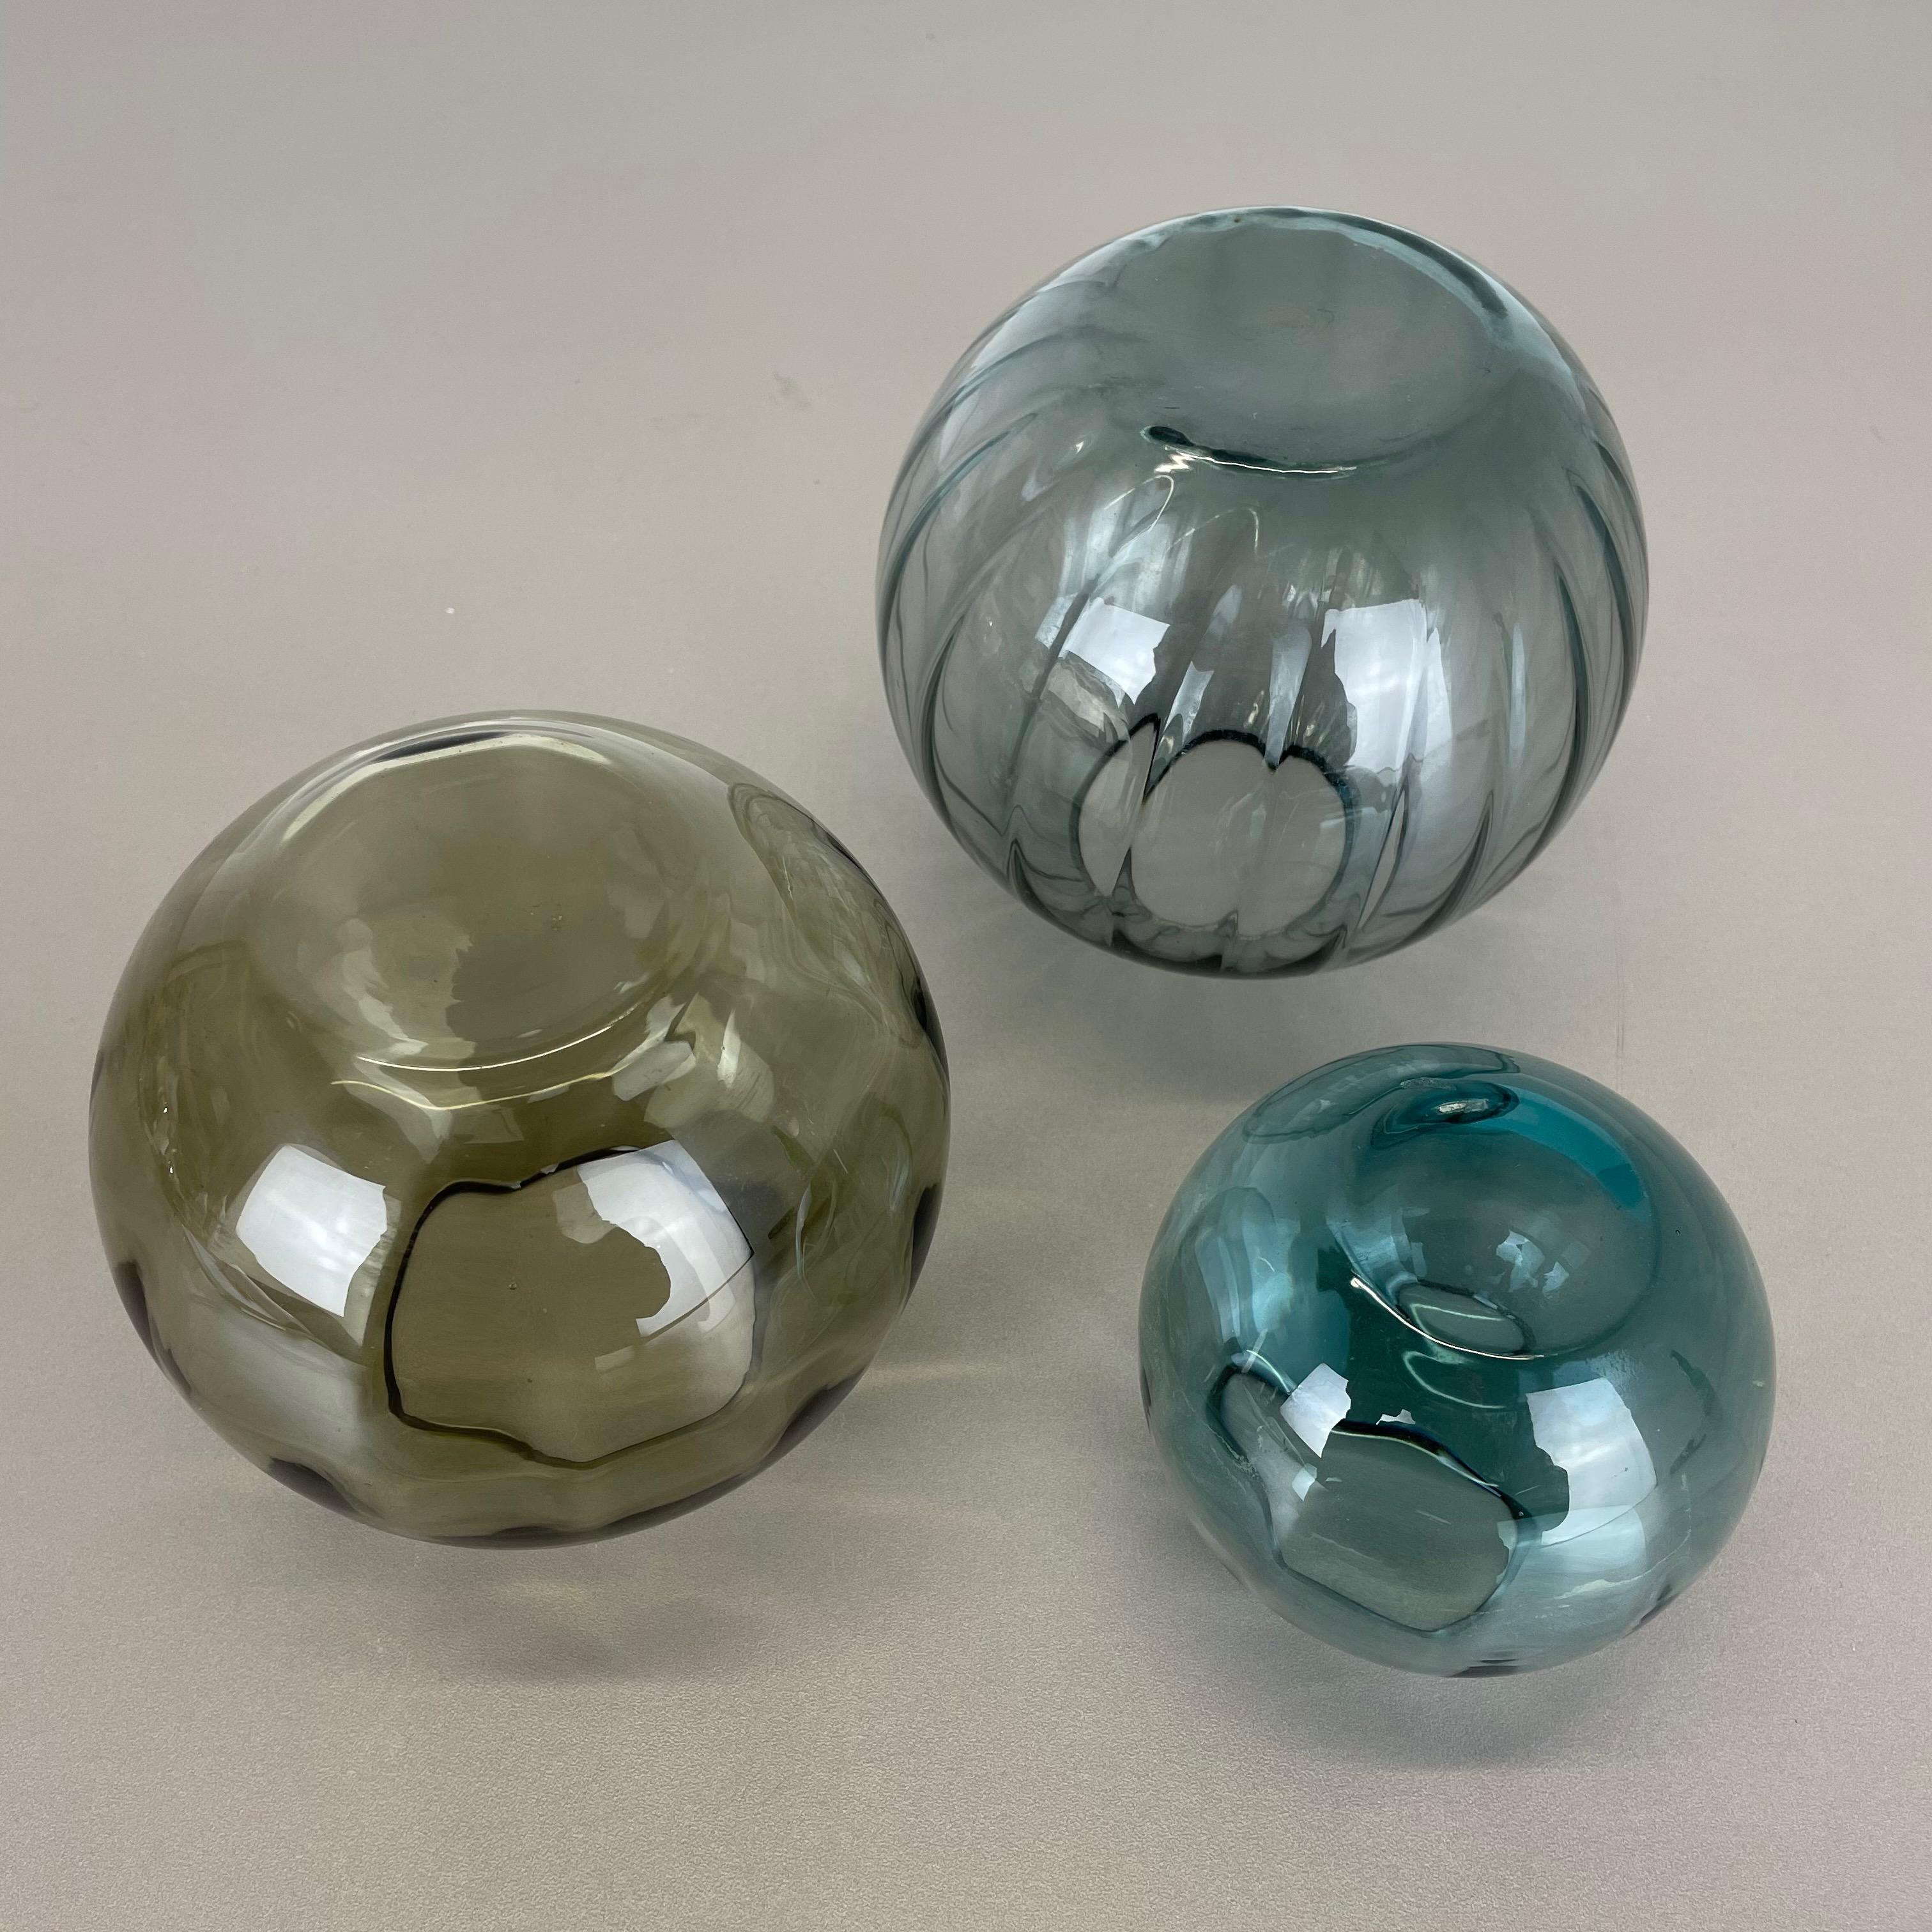 Vintage 1960s Set of 3 Ball Vases Turmaline by Wilhelm Wagenfeld for WMF Germany For Sale 11